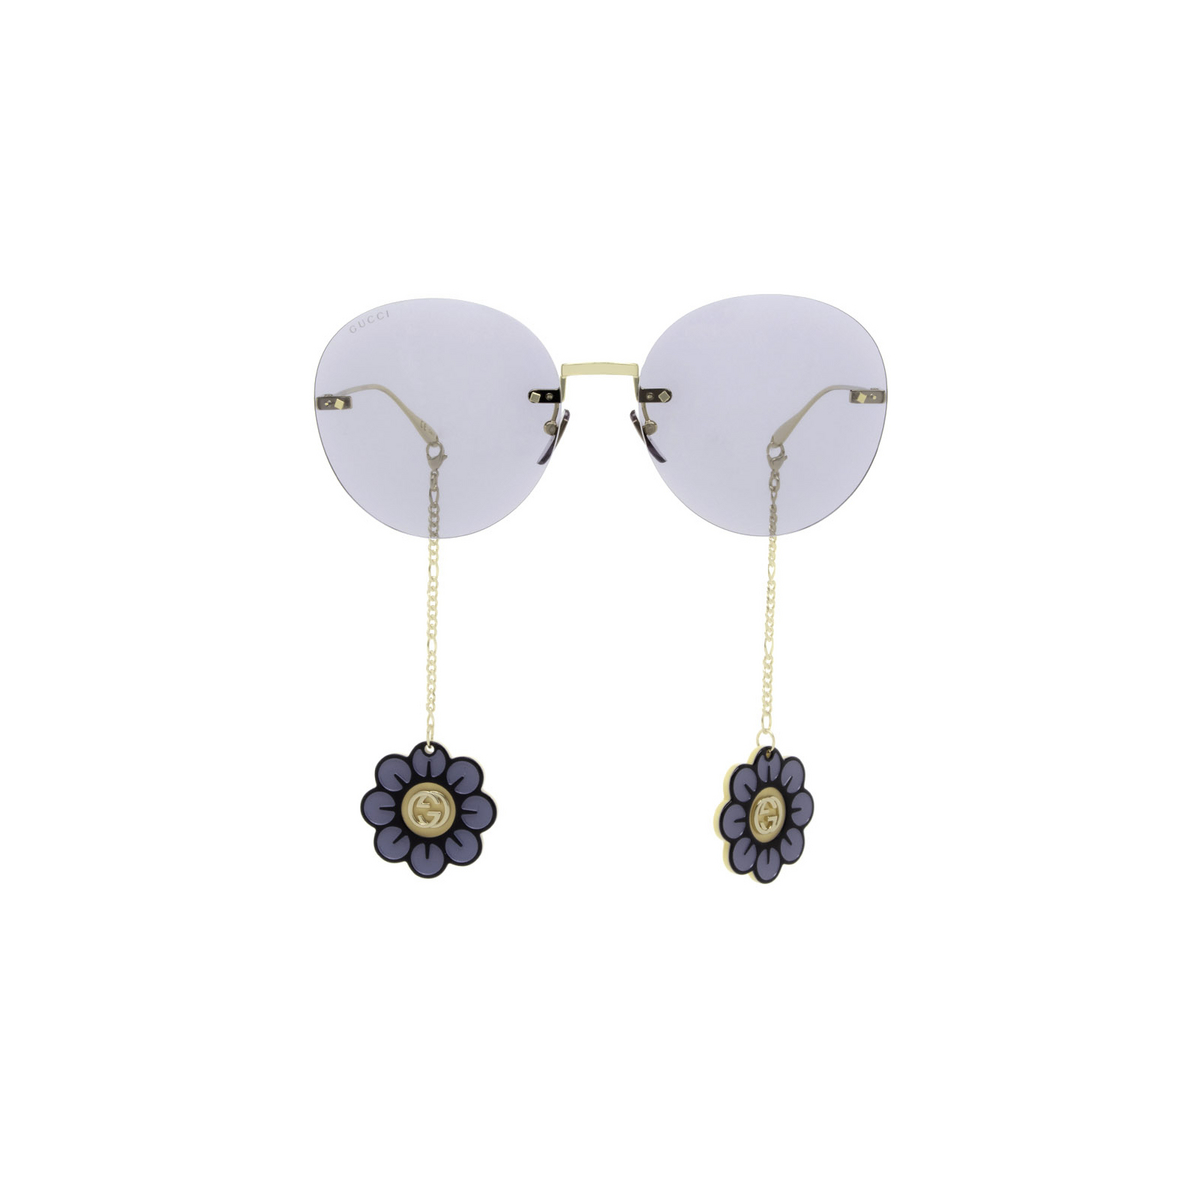 Gucci® Round Sunglasses: GG1149S color Gold 006 - front view.